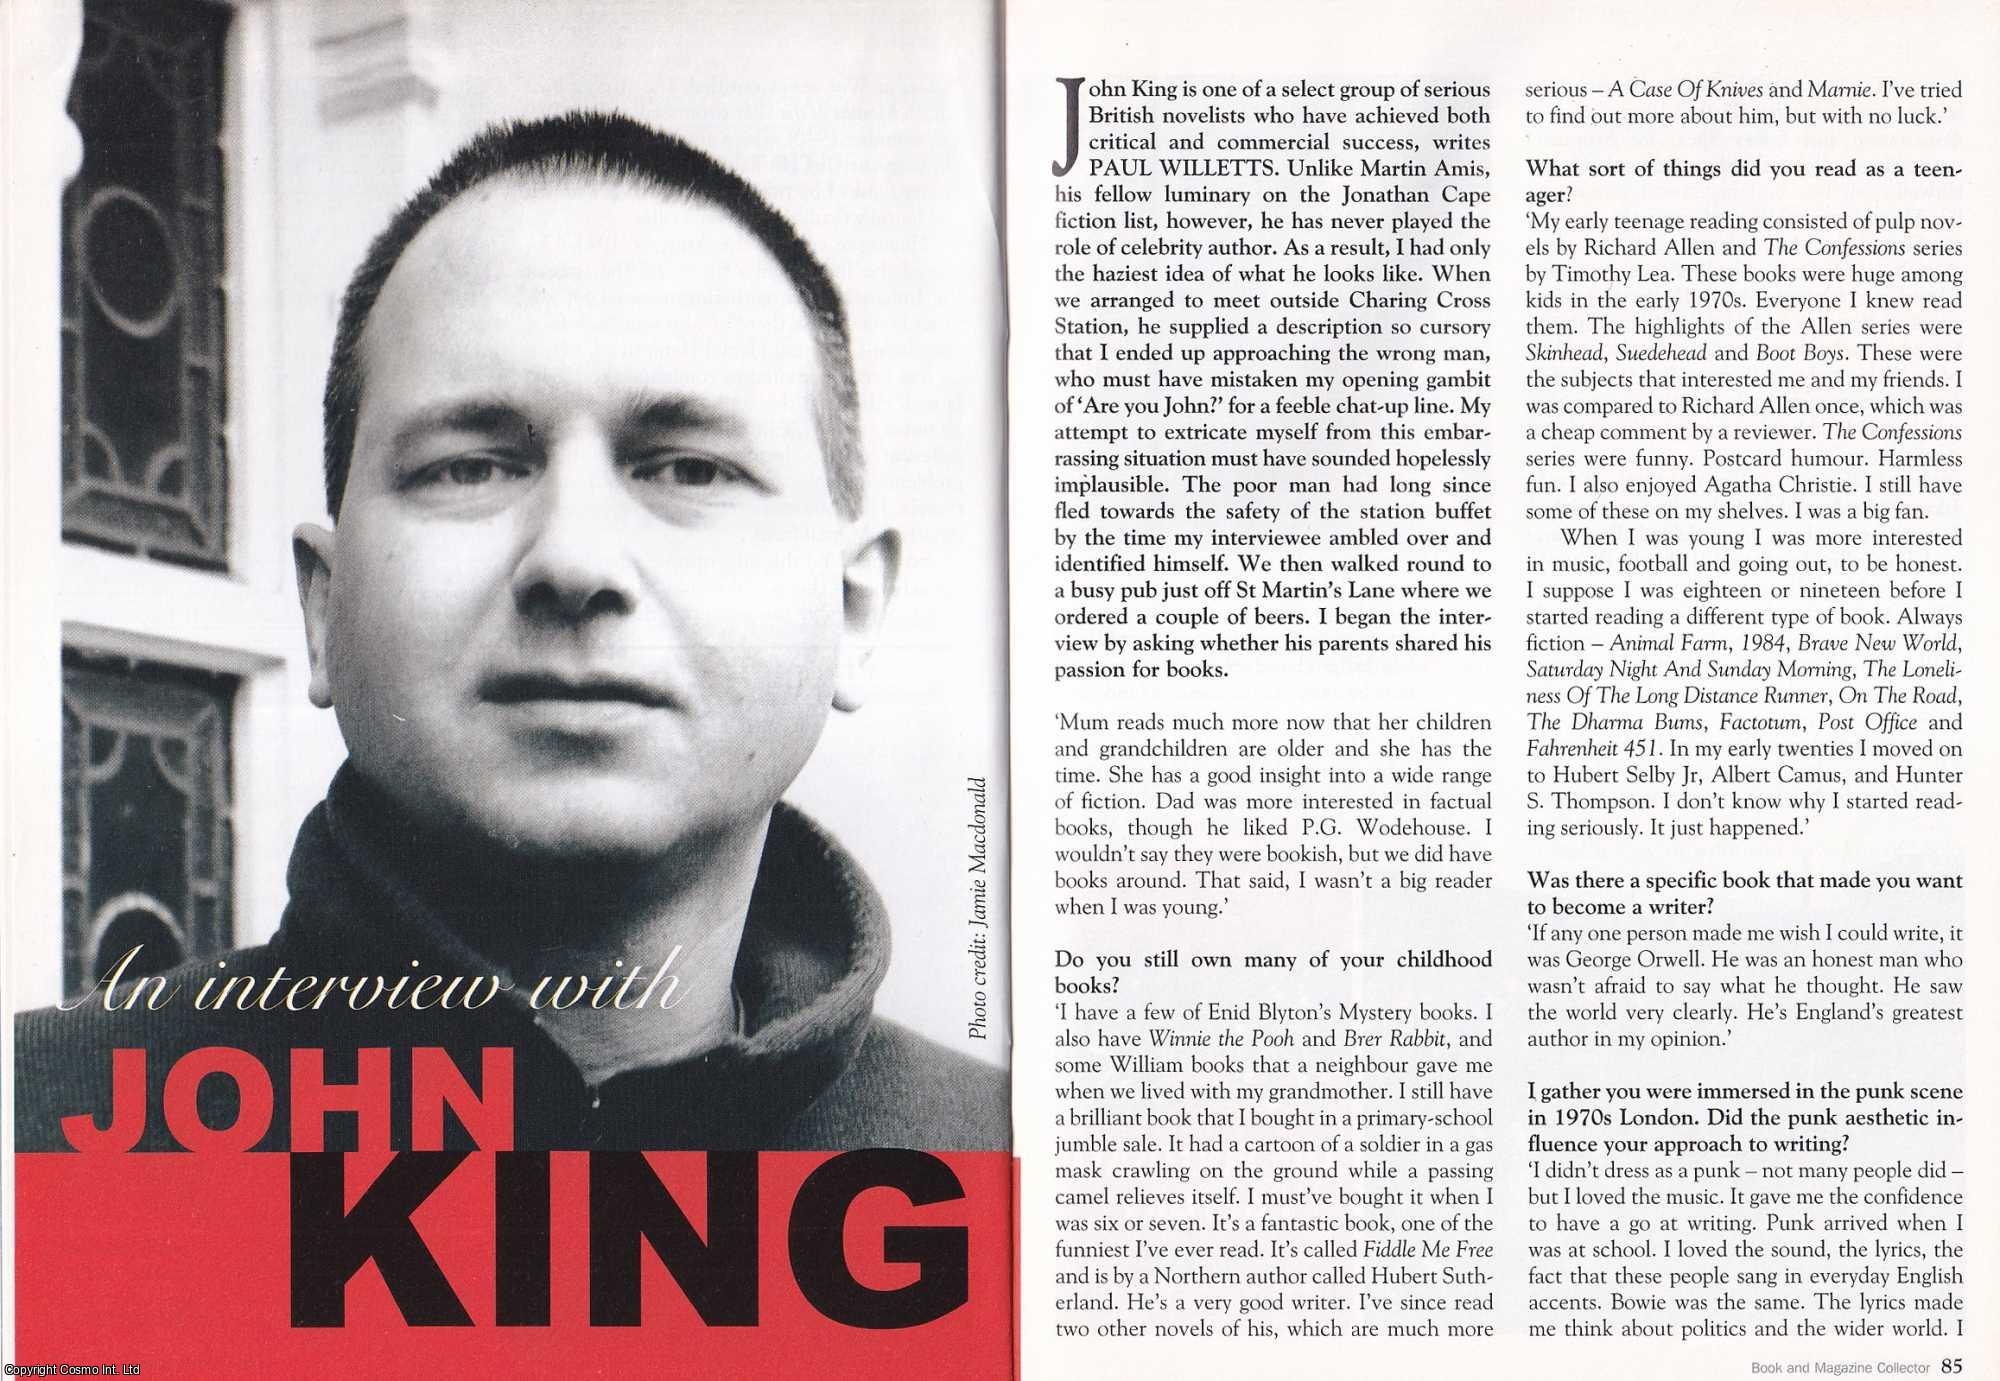 --- - An Interview with John King. This is an original article separated from an issue of The Book & Magazine Collector publication.